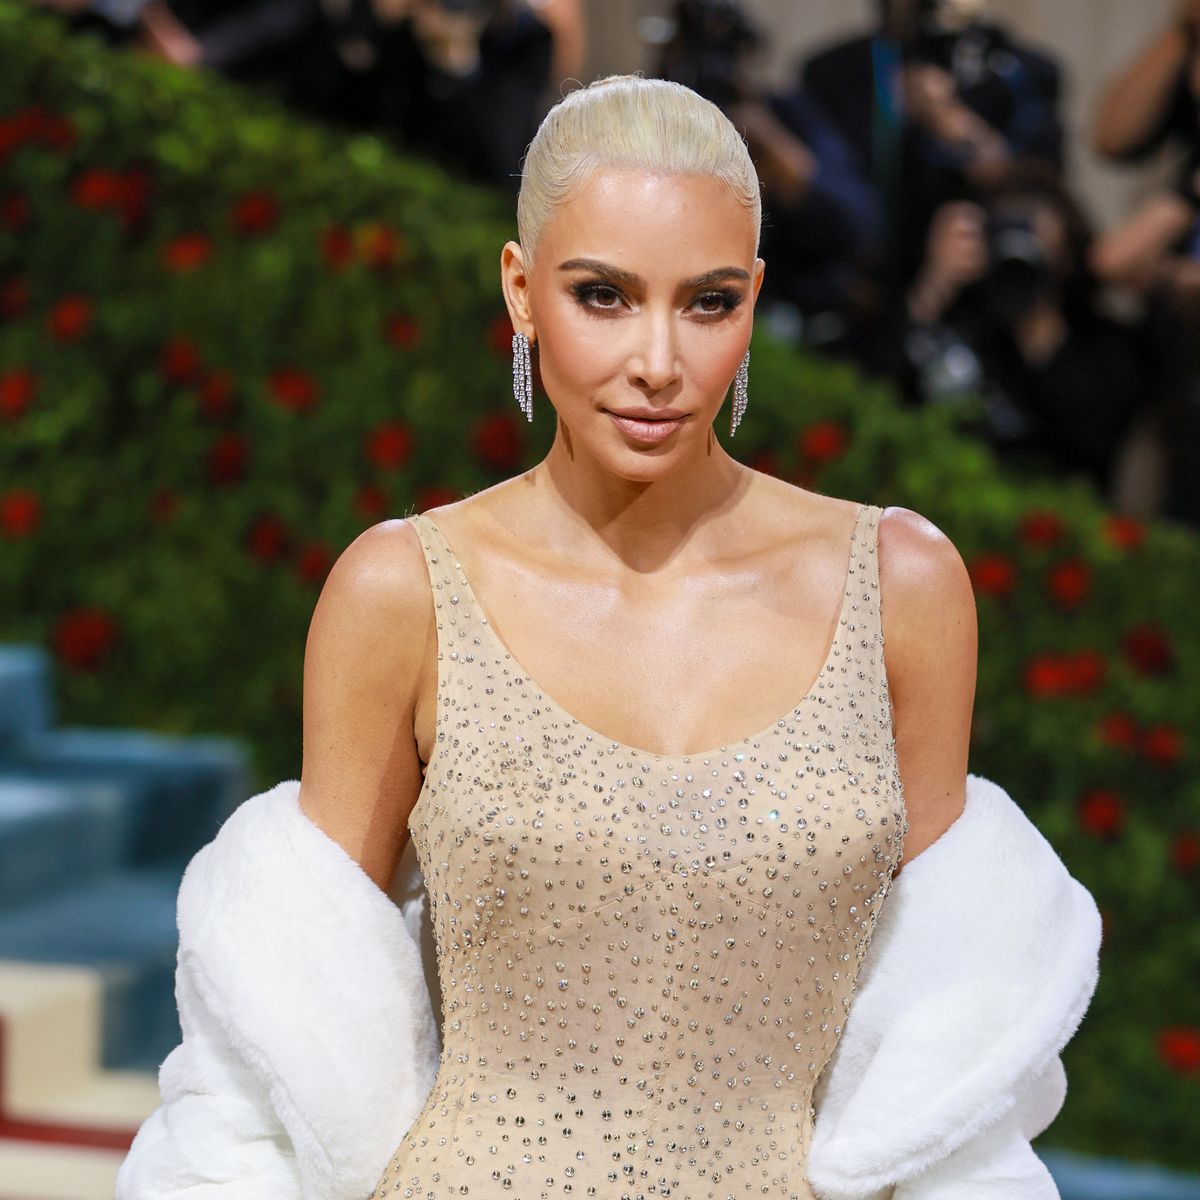 Kim Kardashian is back to black hairbut not before one last blonde  magazine cover